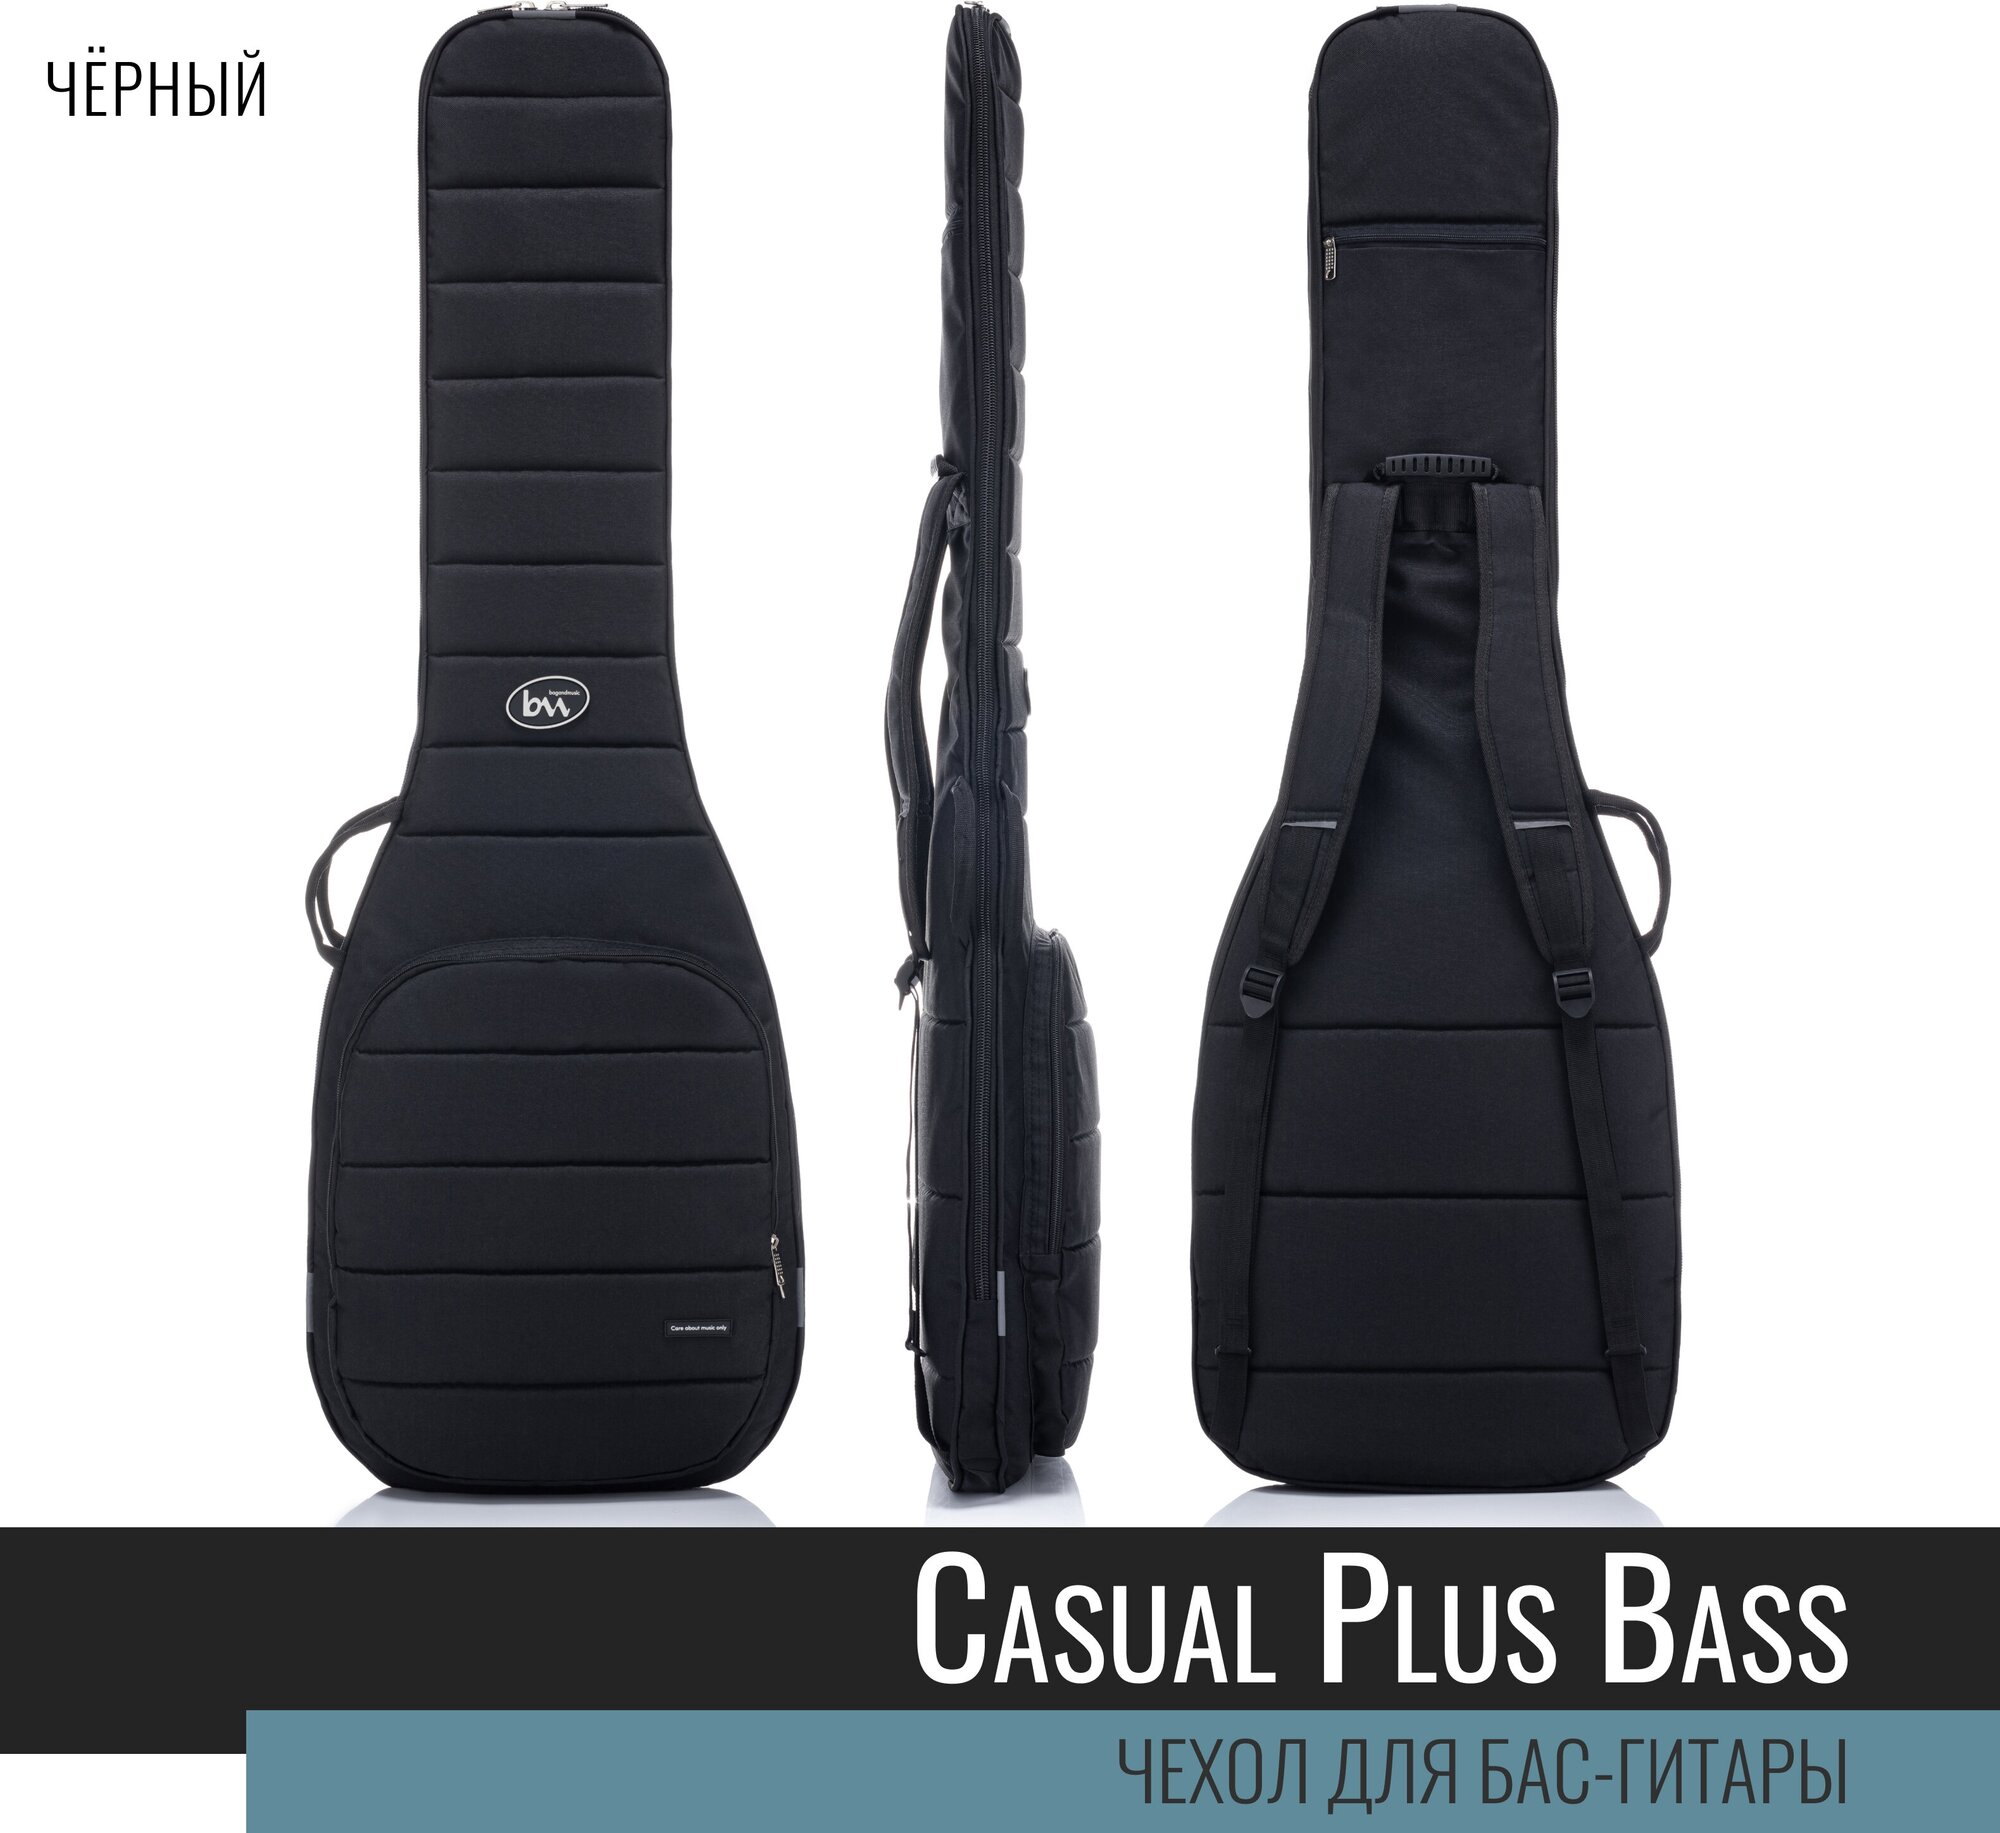 Bass Casual Plus